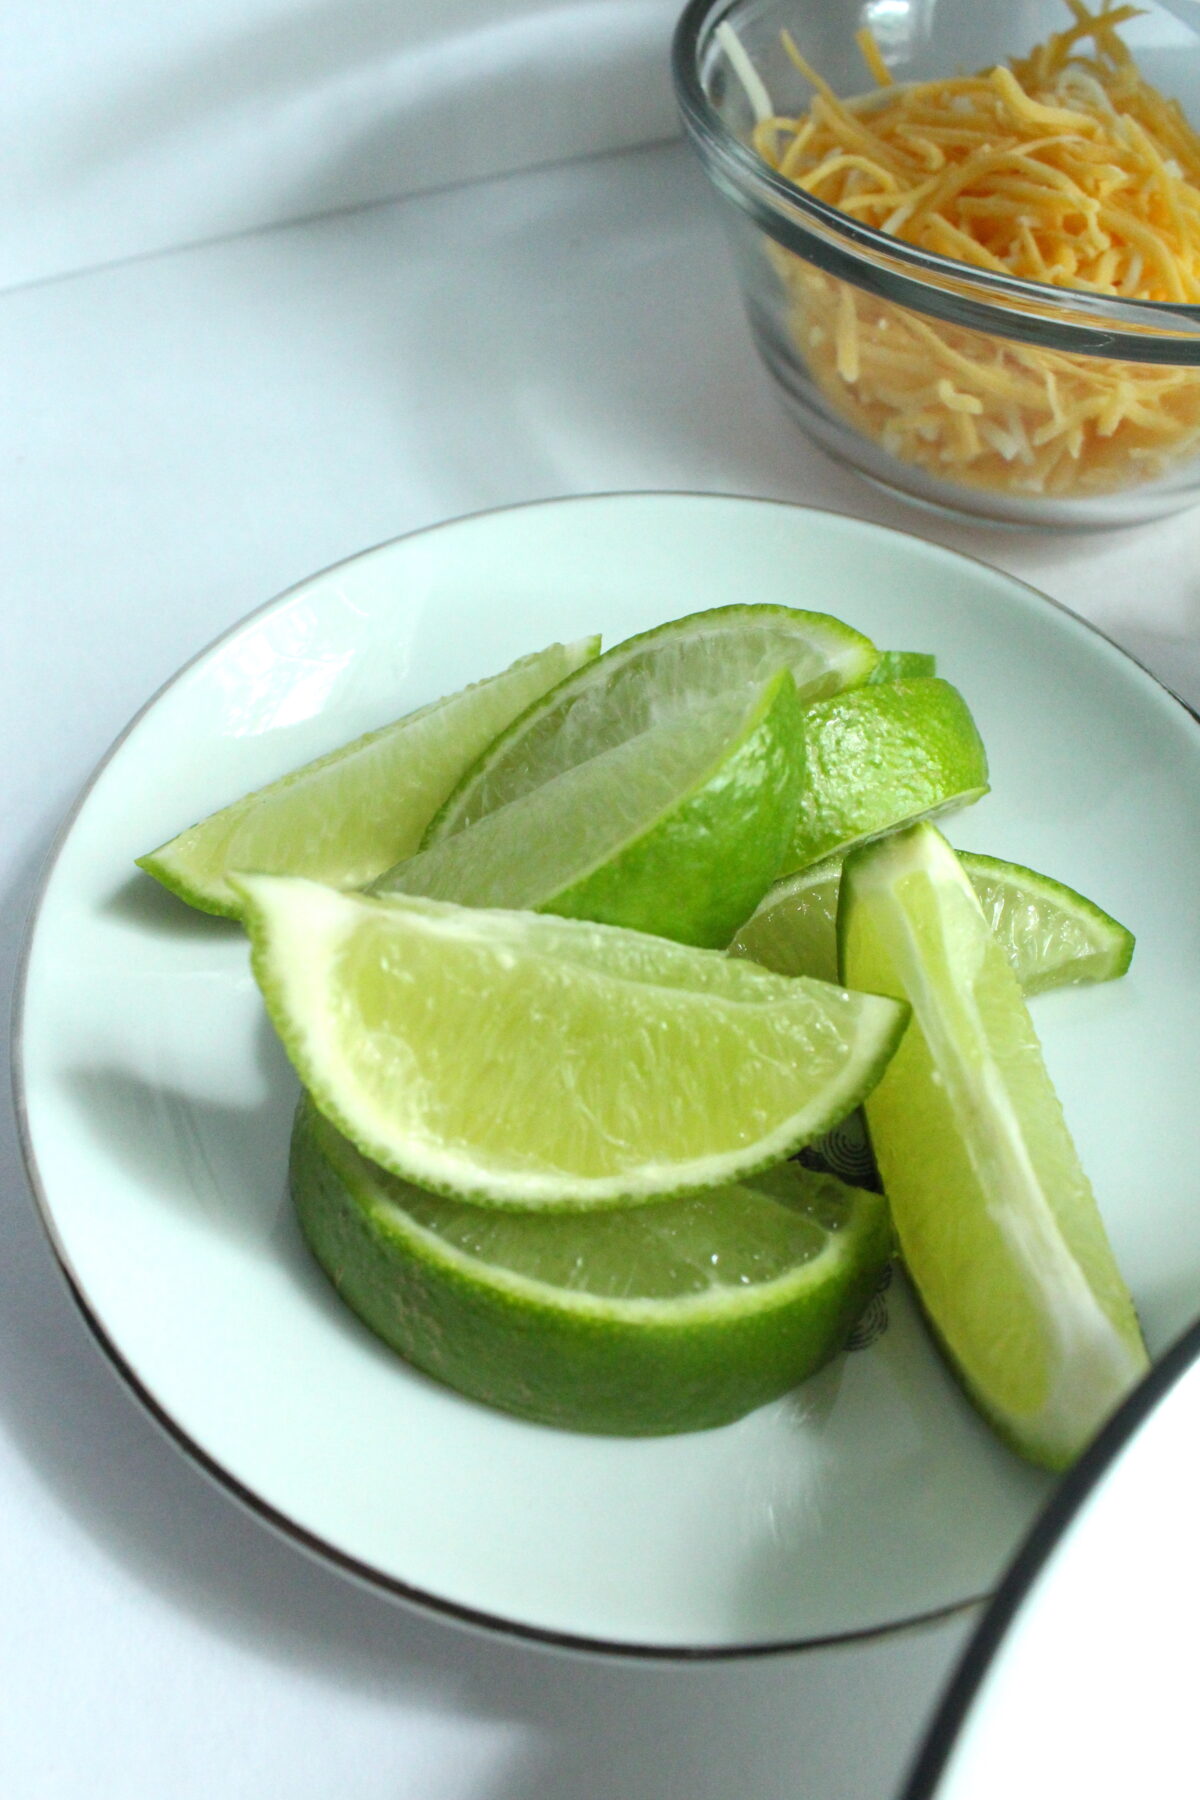 A plate of sliced limes.